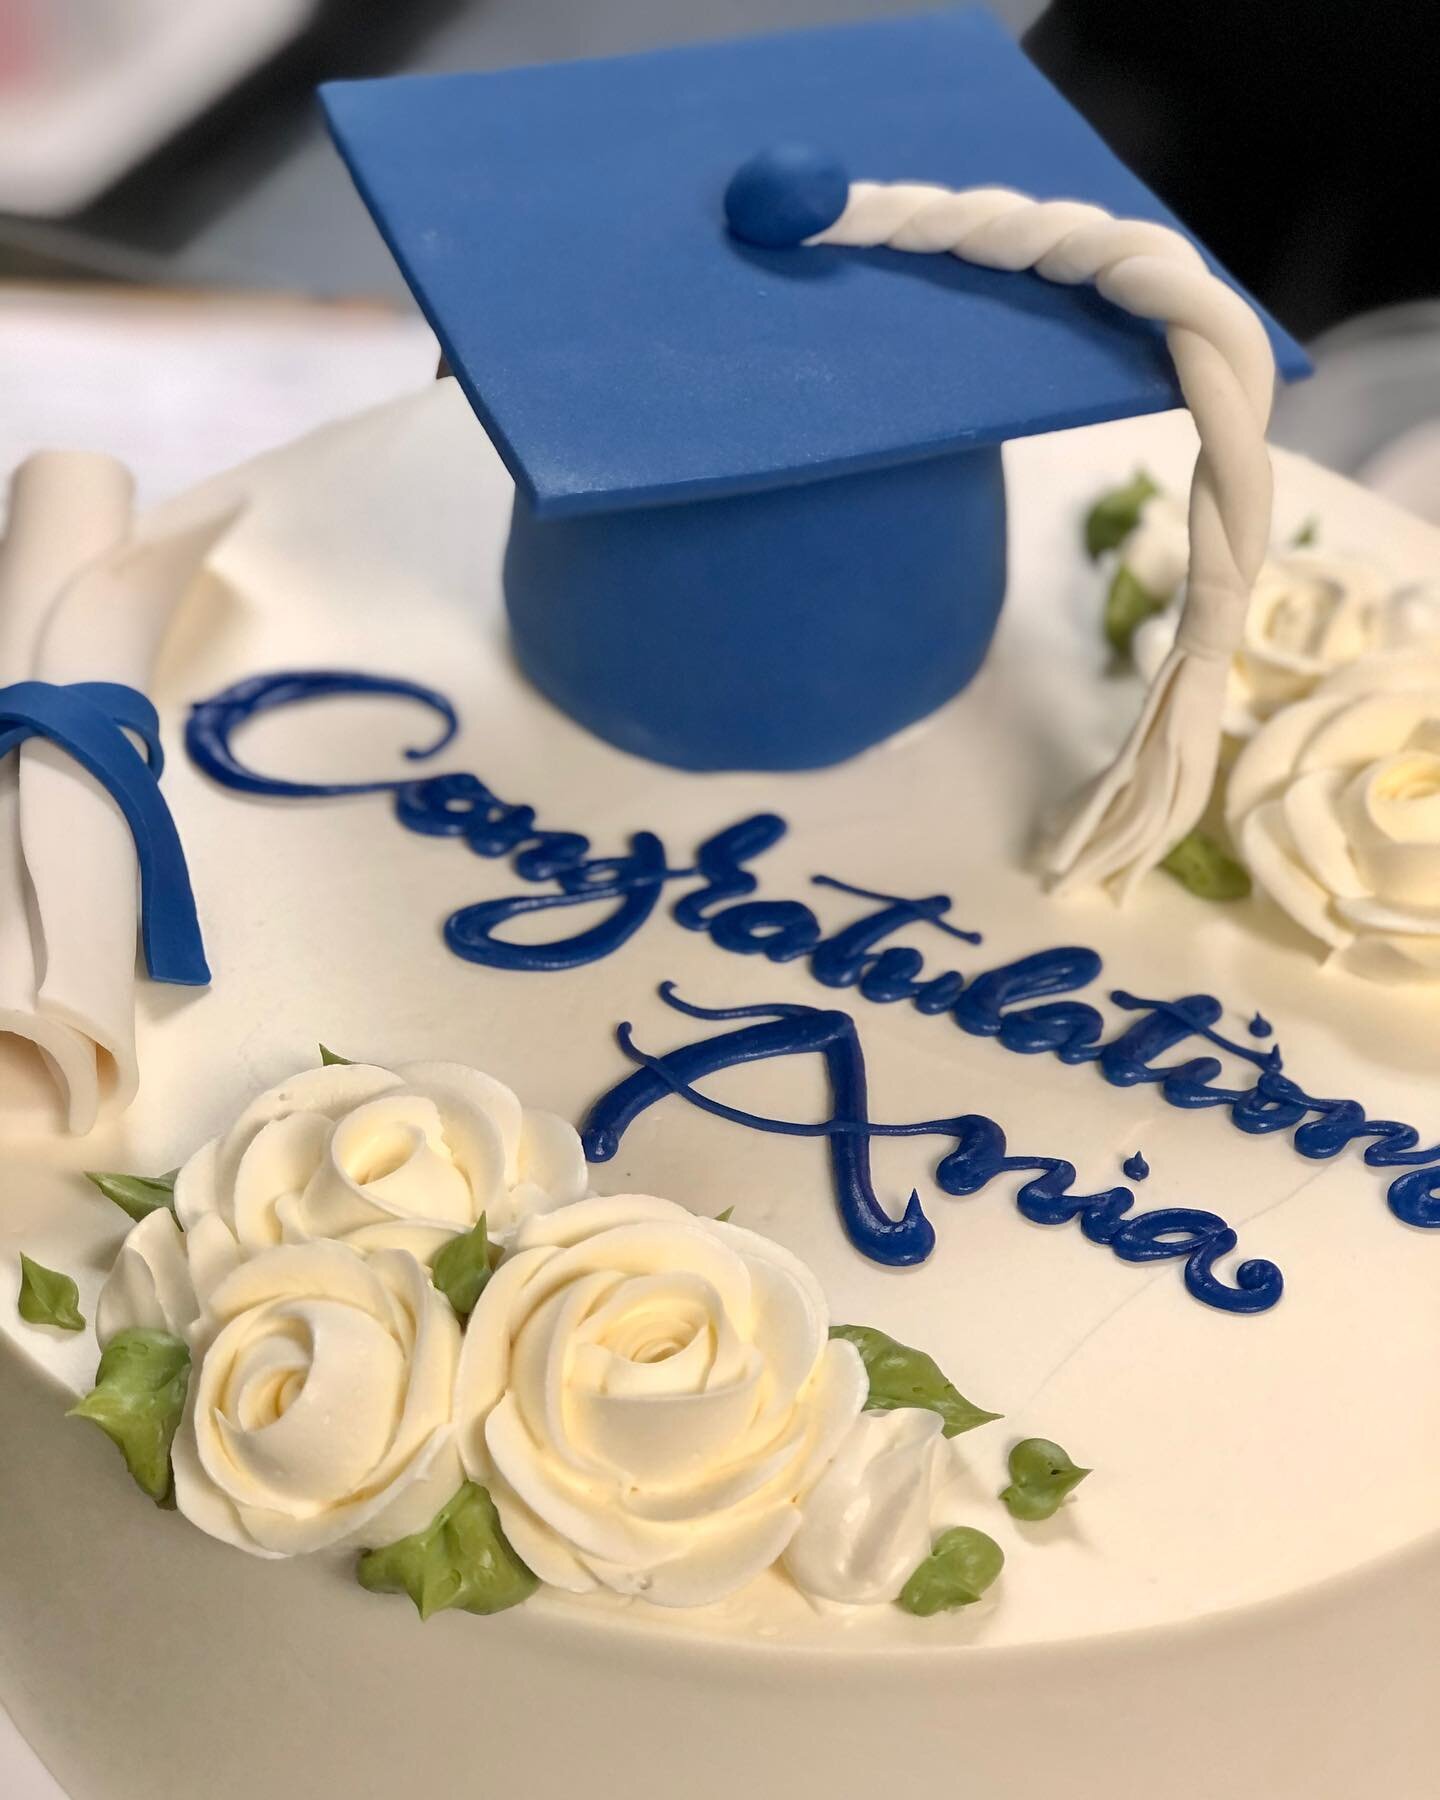 With graduations, weddings and other special occasions back in full swing we are booking up for custom orders at least TWO WEEKS in advance for weekends.  If you need to place an order for a cake, cupcakes, cookies or other decorated items for the mo